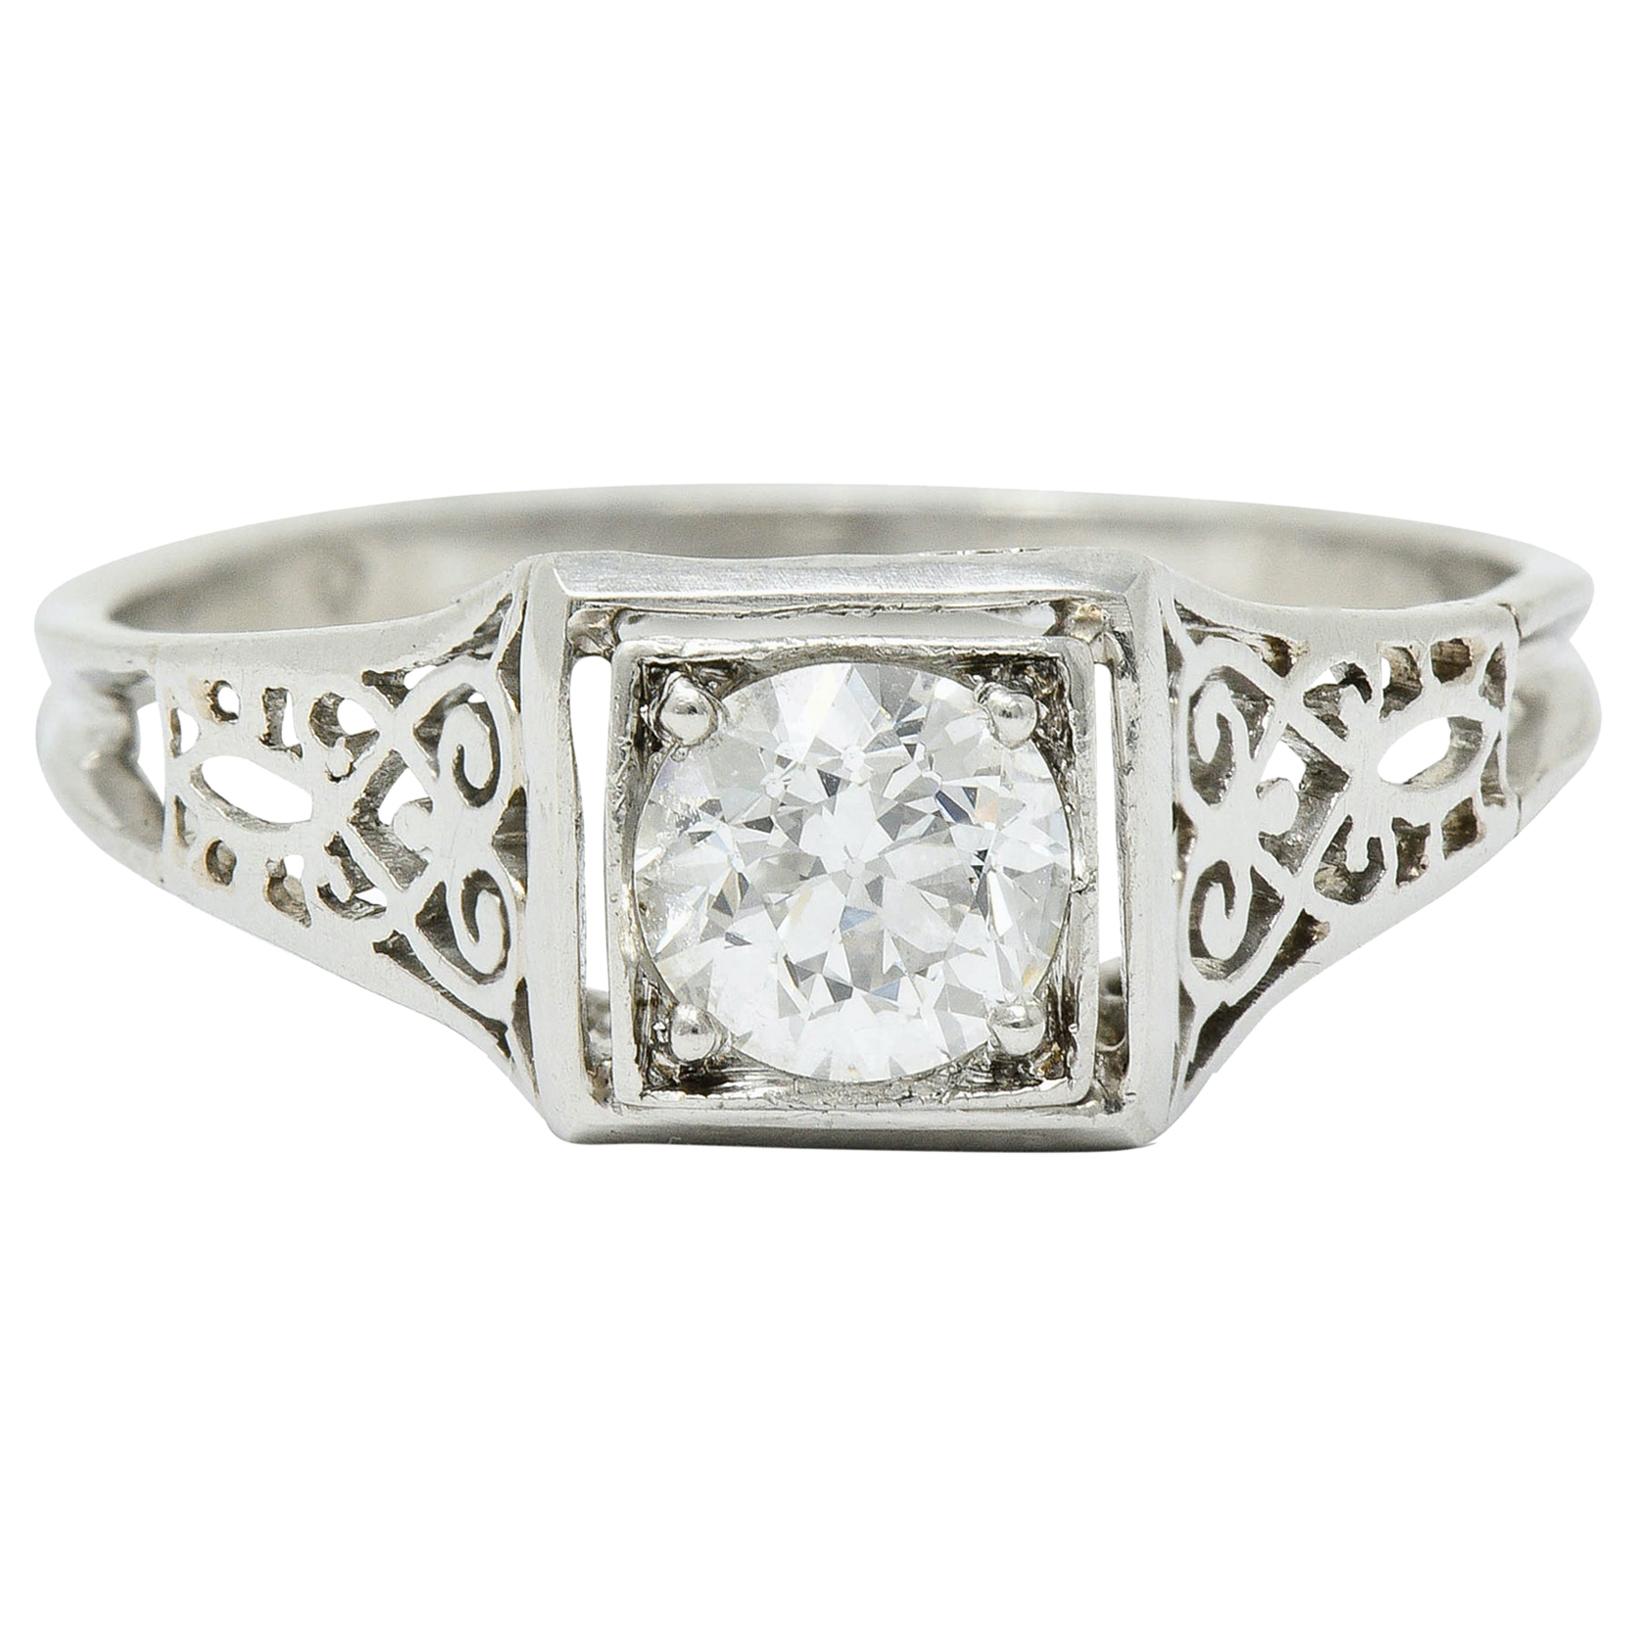 W.W. Fulmer & Co. 0.46 Carat Diamond Platinum Scrolled Heart Engagement Ring For Sale